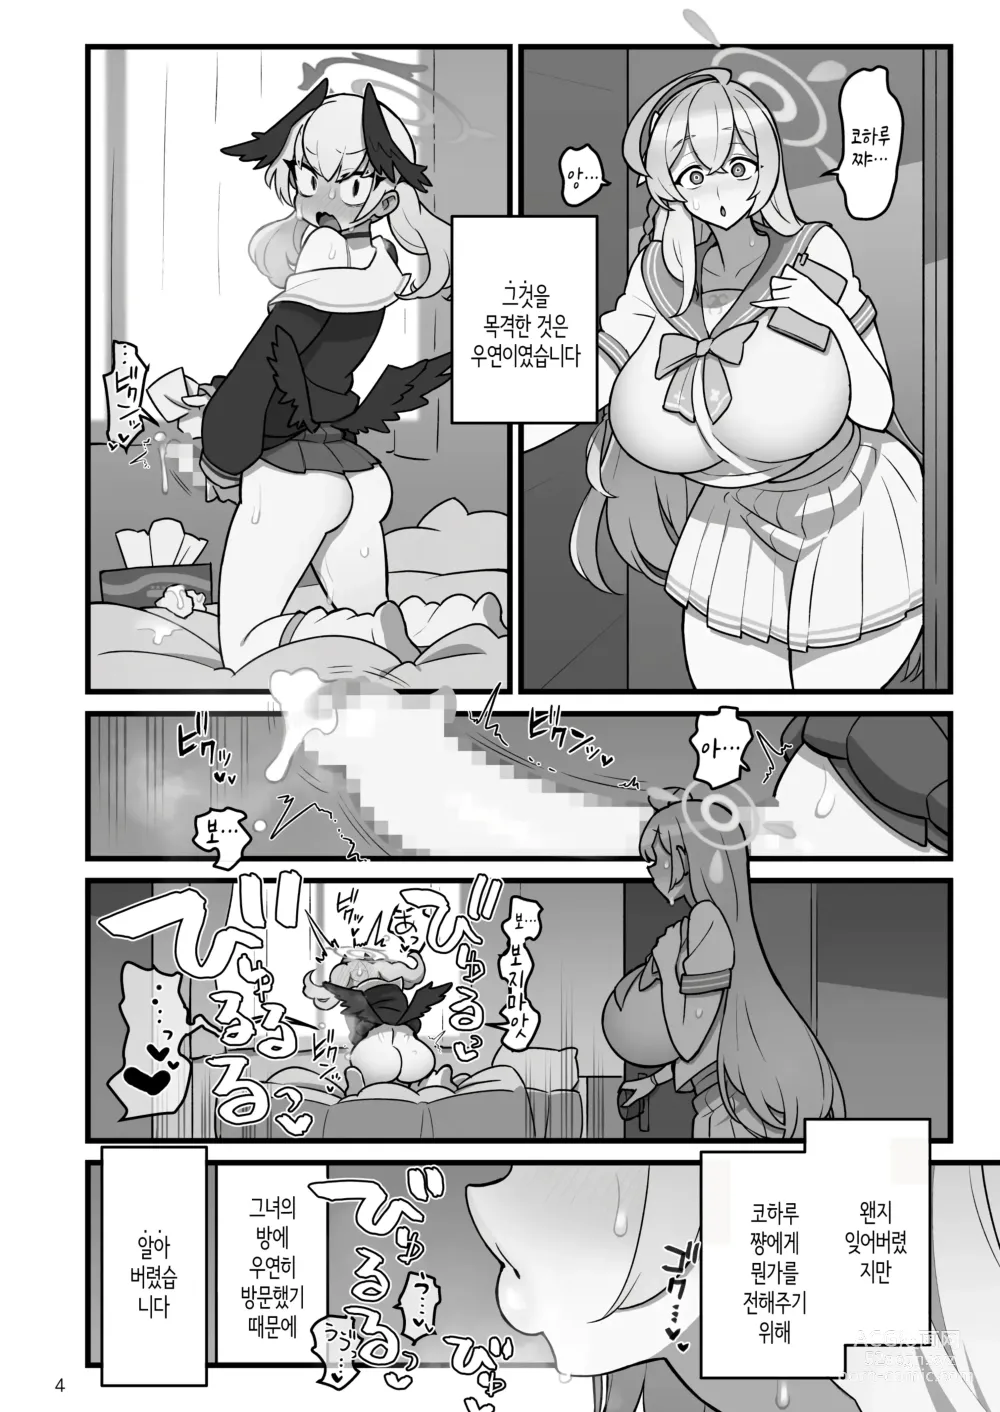 Page 5 of doujinshi 코하루 후타나루